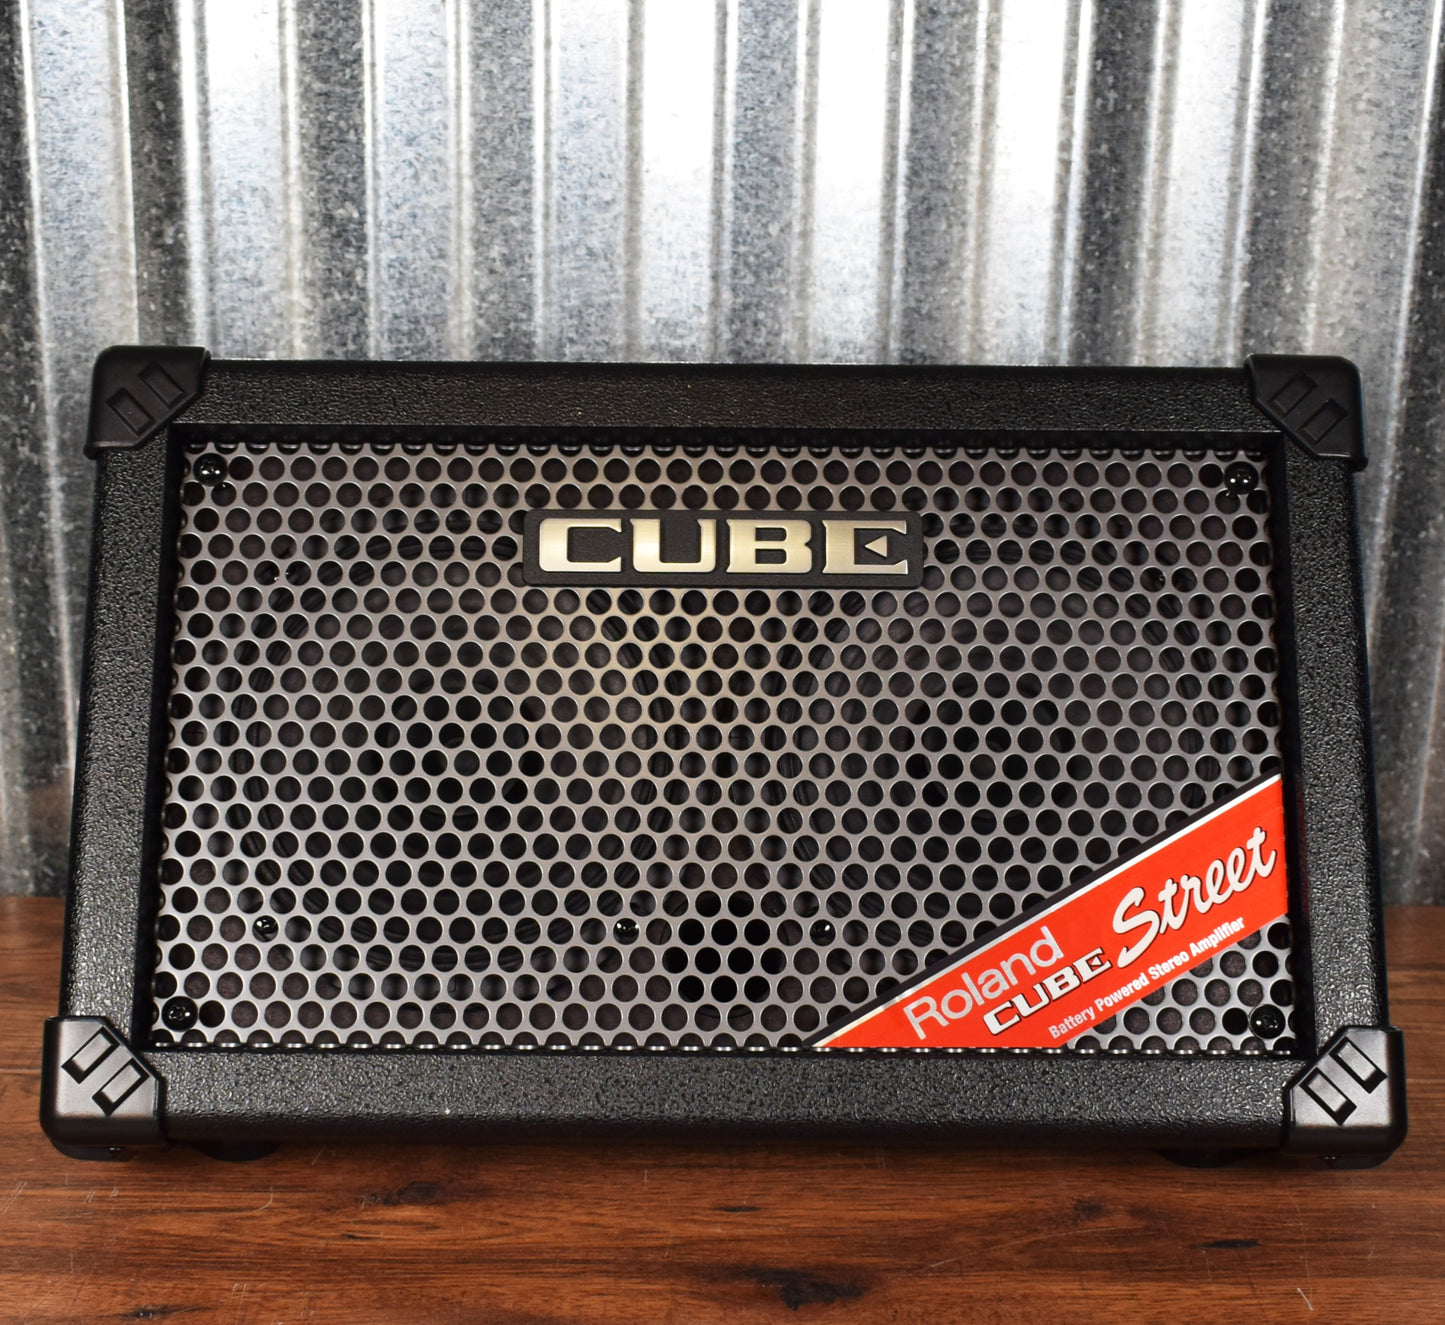 Roland CUBE STREET Battery Powered Guitar Vocal Combo Amplifier PA Black